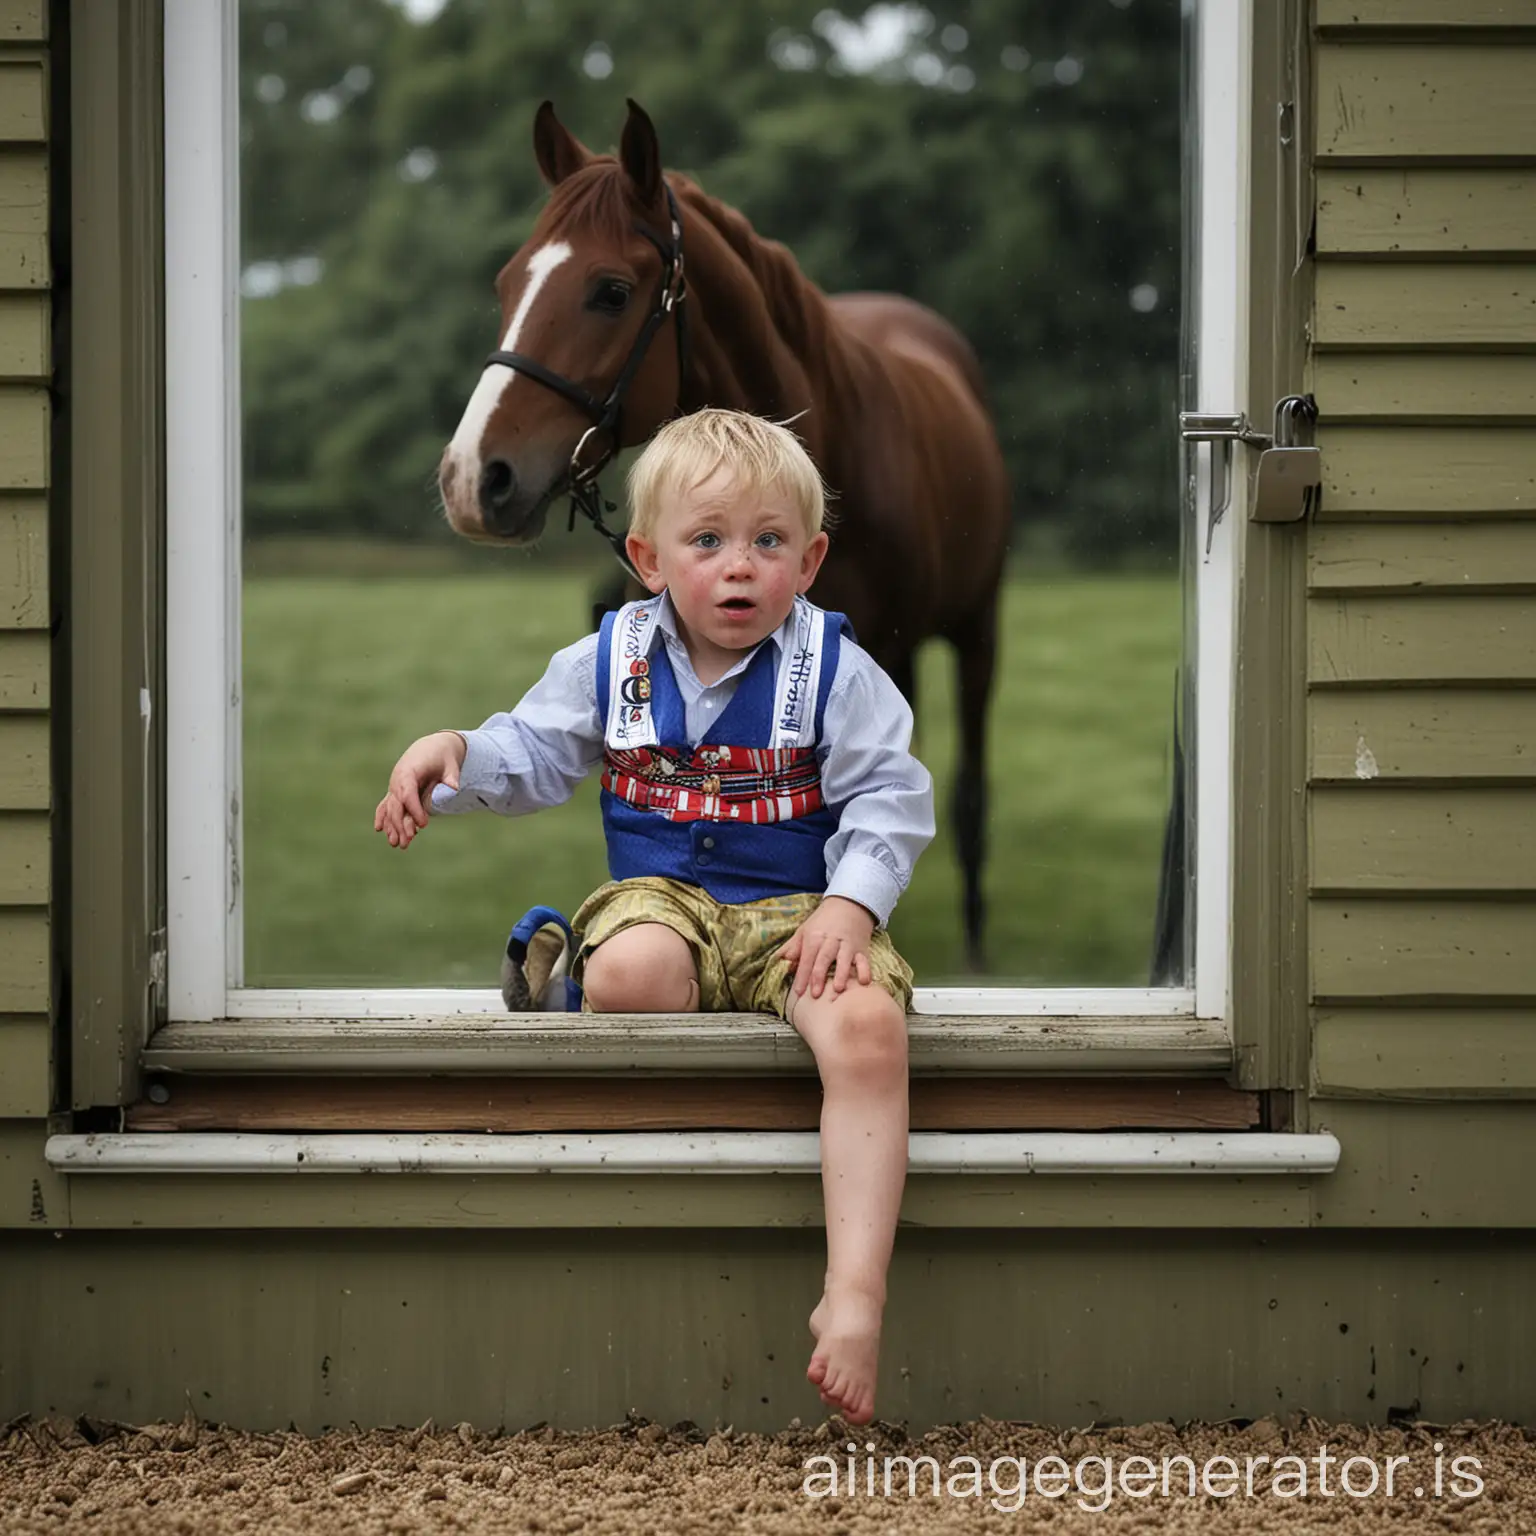 Merlin Coles, 3, watches horse racing at Royal Ascot from his home in Bere Regis, England, on June 17. The boy is sitting on his horse, Mr. Glitter Sparkles, with his dog, Mistress, as racing resumed behind closed doors.